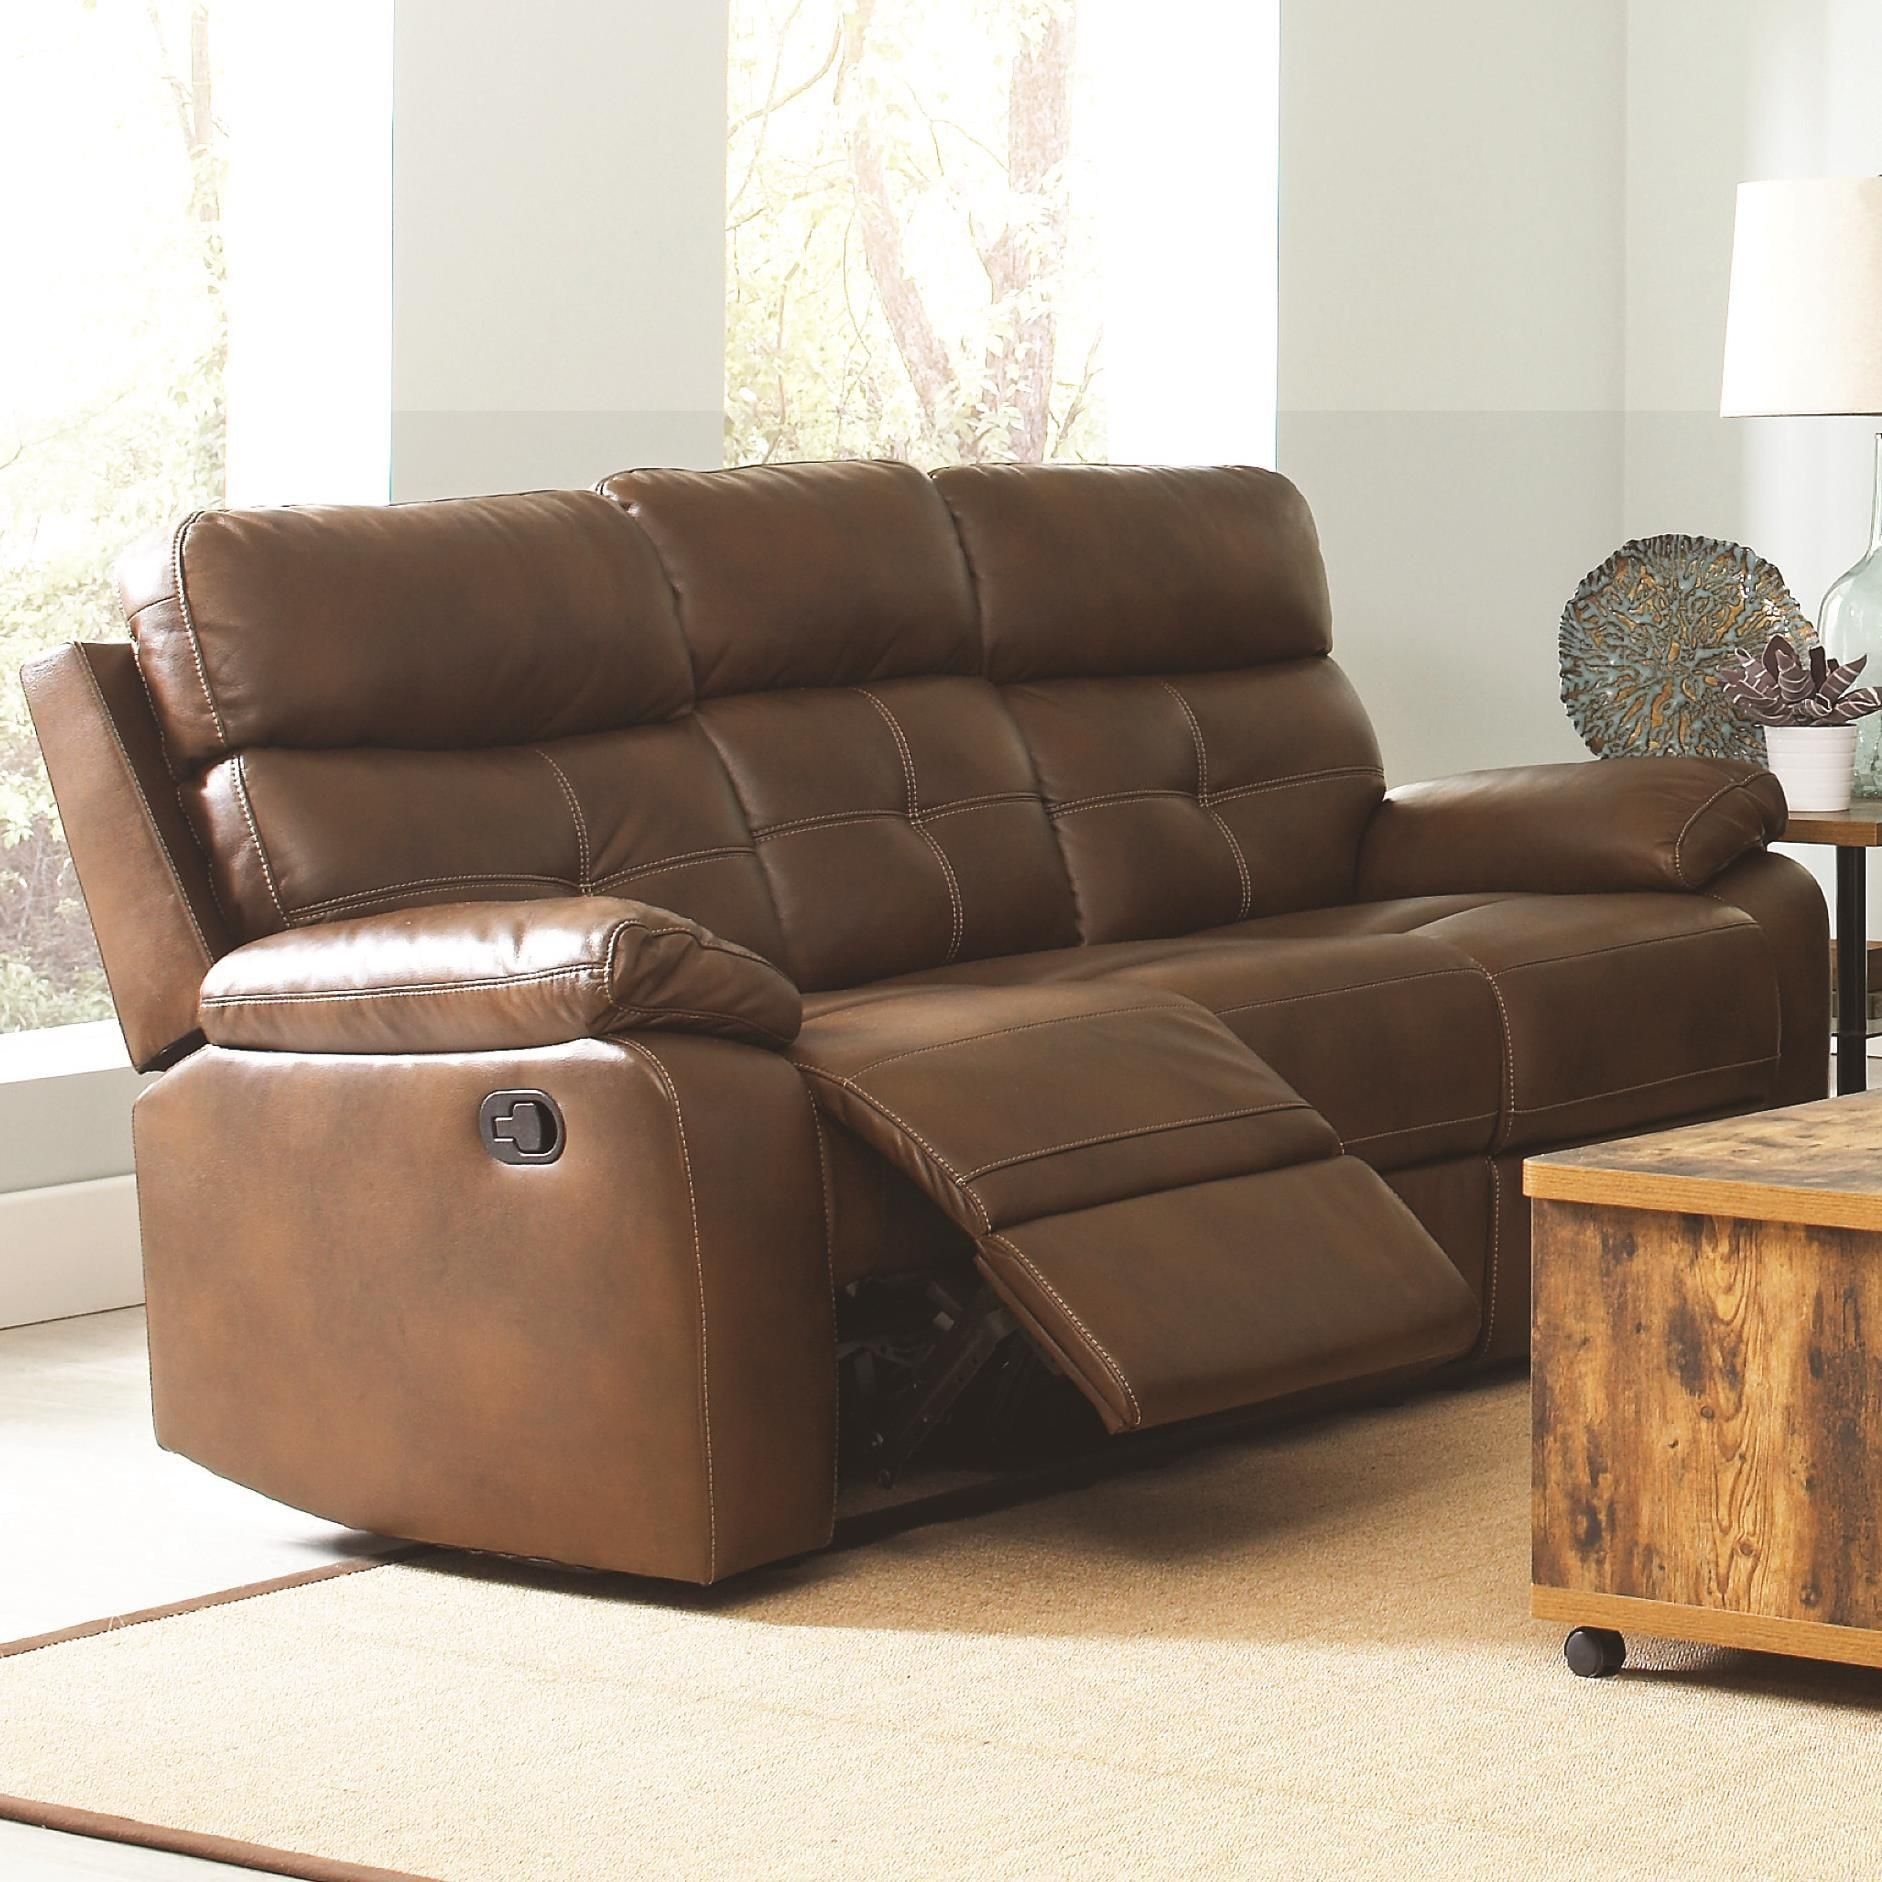 Damiano Faux Leather Reclining Sofa From Coaster (601691) | Coleman Inside Faux Leather Sofas (View 21 of 21)